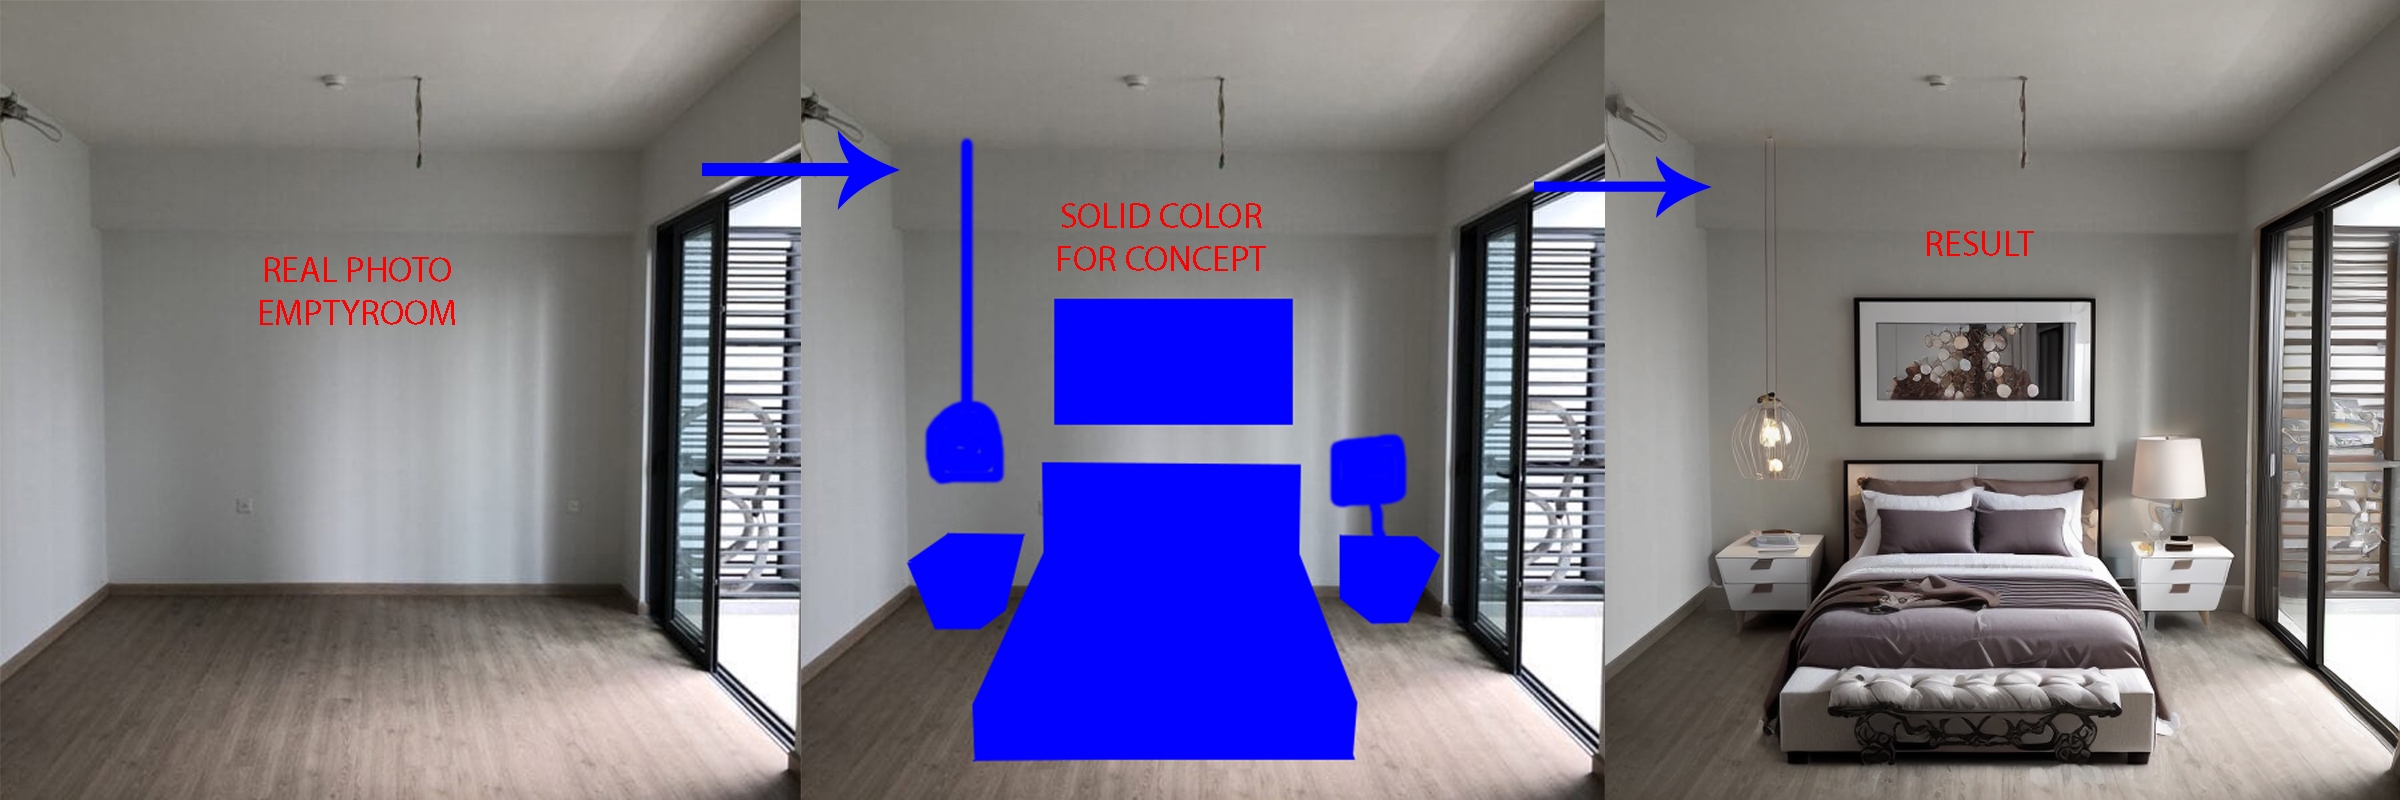 Add furnitures to Empty old room interior. <br>Step1: Take photo of empty room<br>Step2: Using BLUE solid color to locate general form of furniture<br>Step3: Search and upload Reference Image<br>Step4: Click and wait for result  